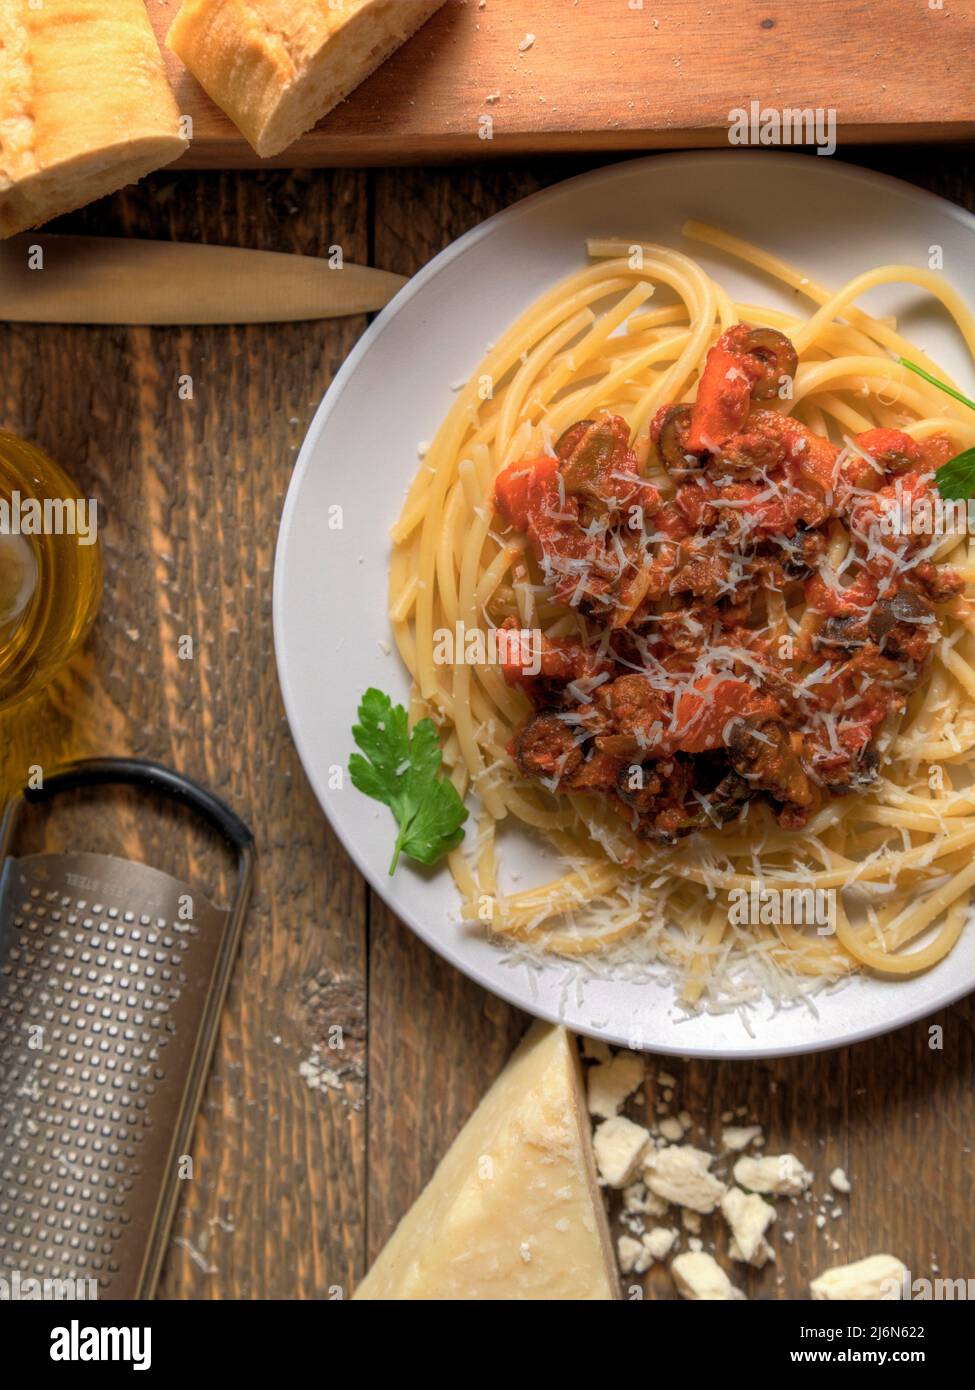 Bucatini Bolognese Pasta Dish eith bread and cheese top view on natural wood table. Stock Photo